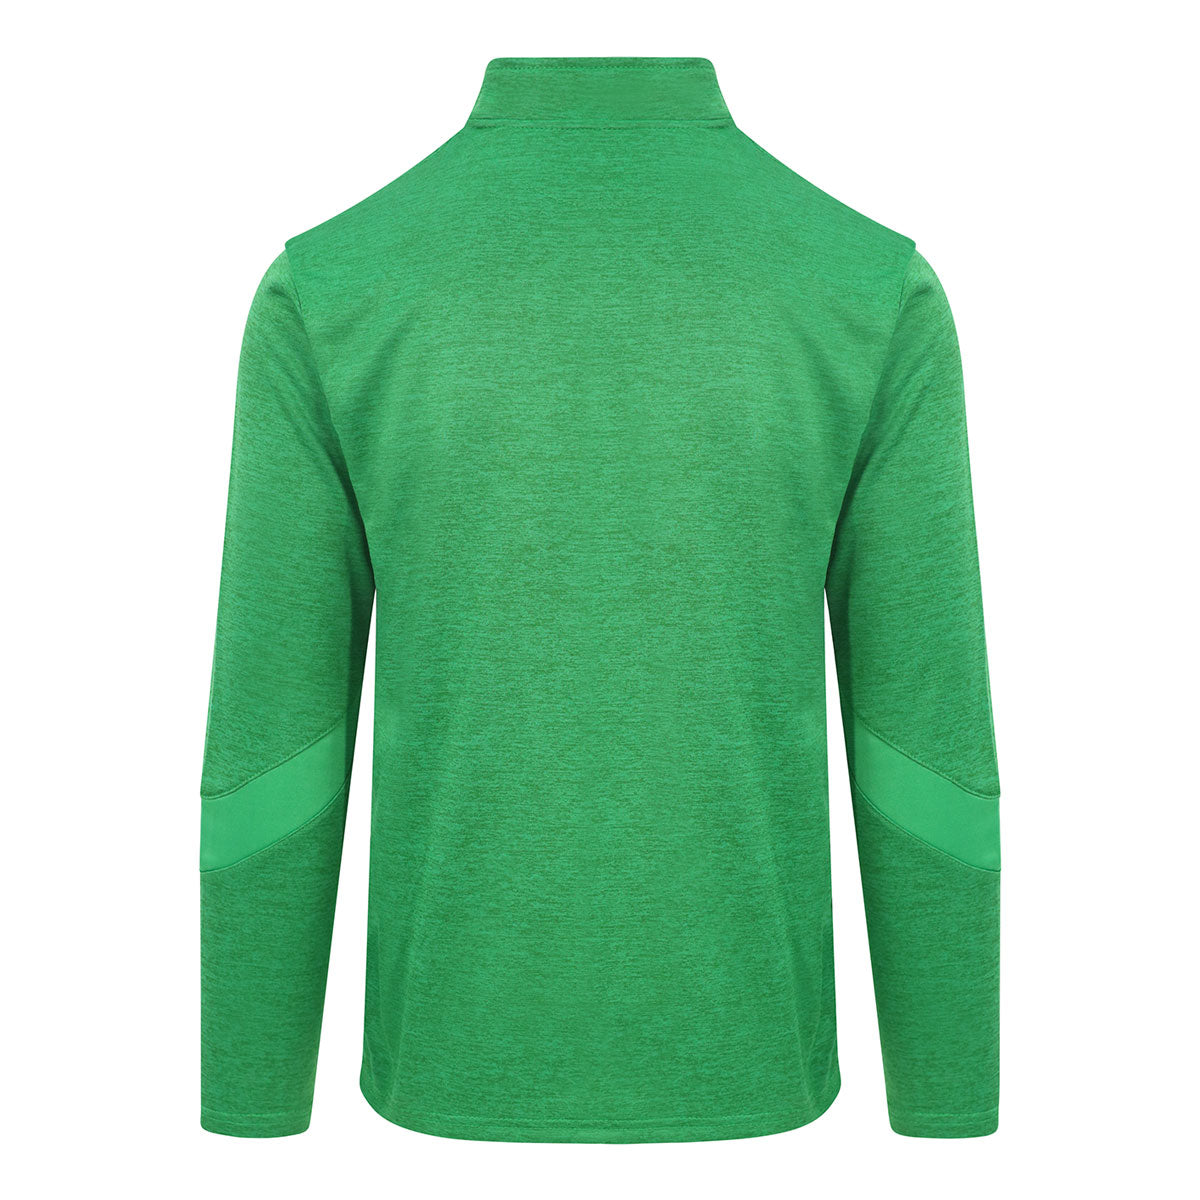 Mc Keever Carbery Rangers Core 22 1/4 Zip Top - Youth - Green